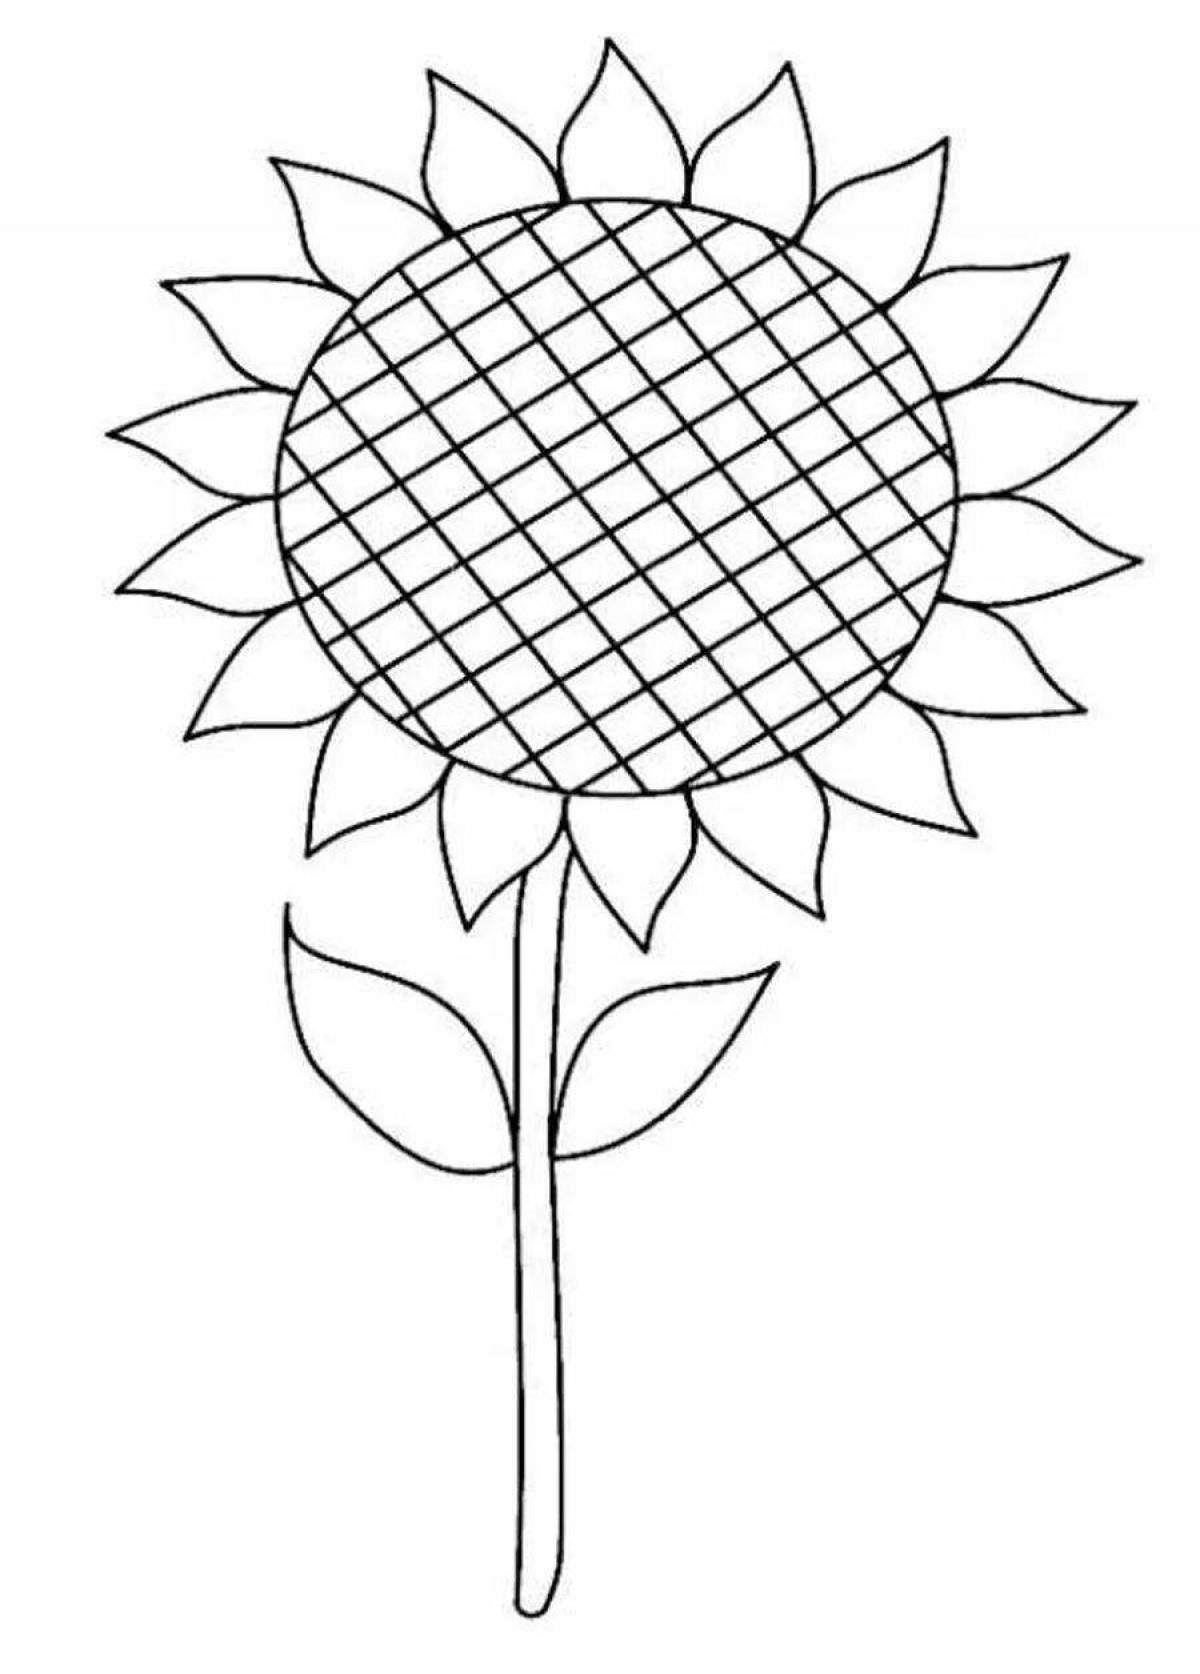 Gorgeous sunflower coloring book for preschoolers 2-3 years old